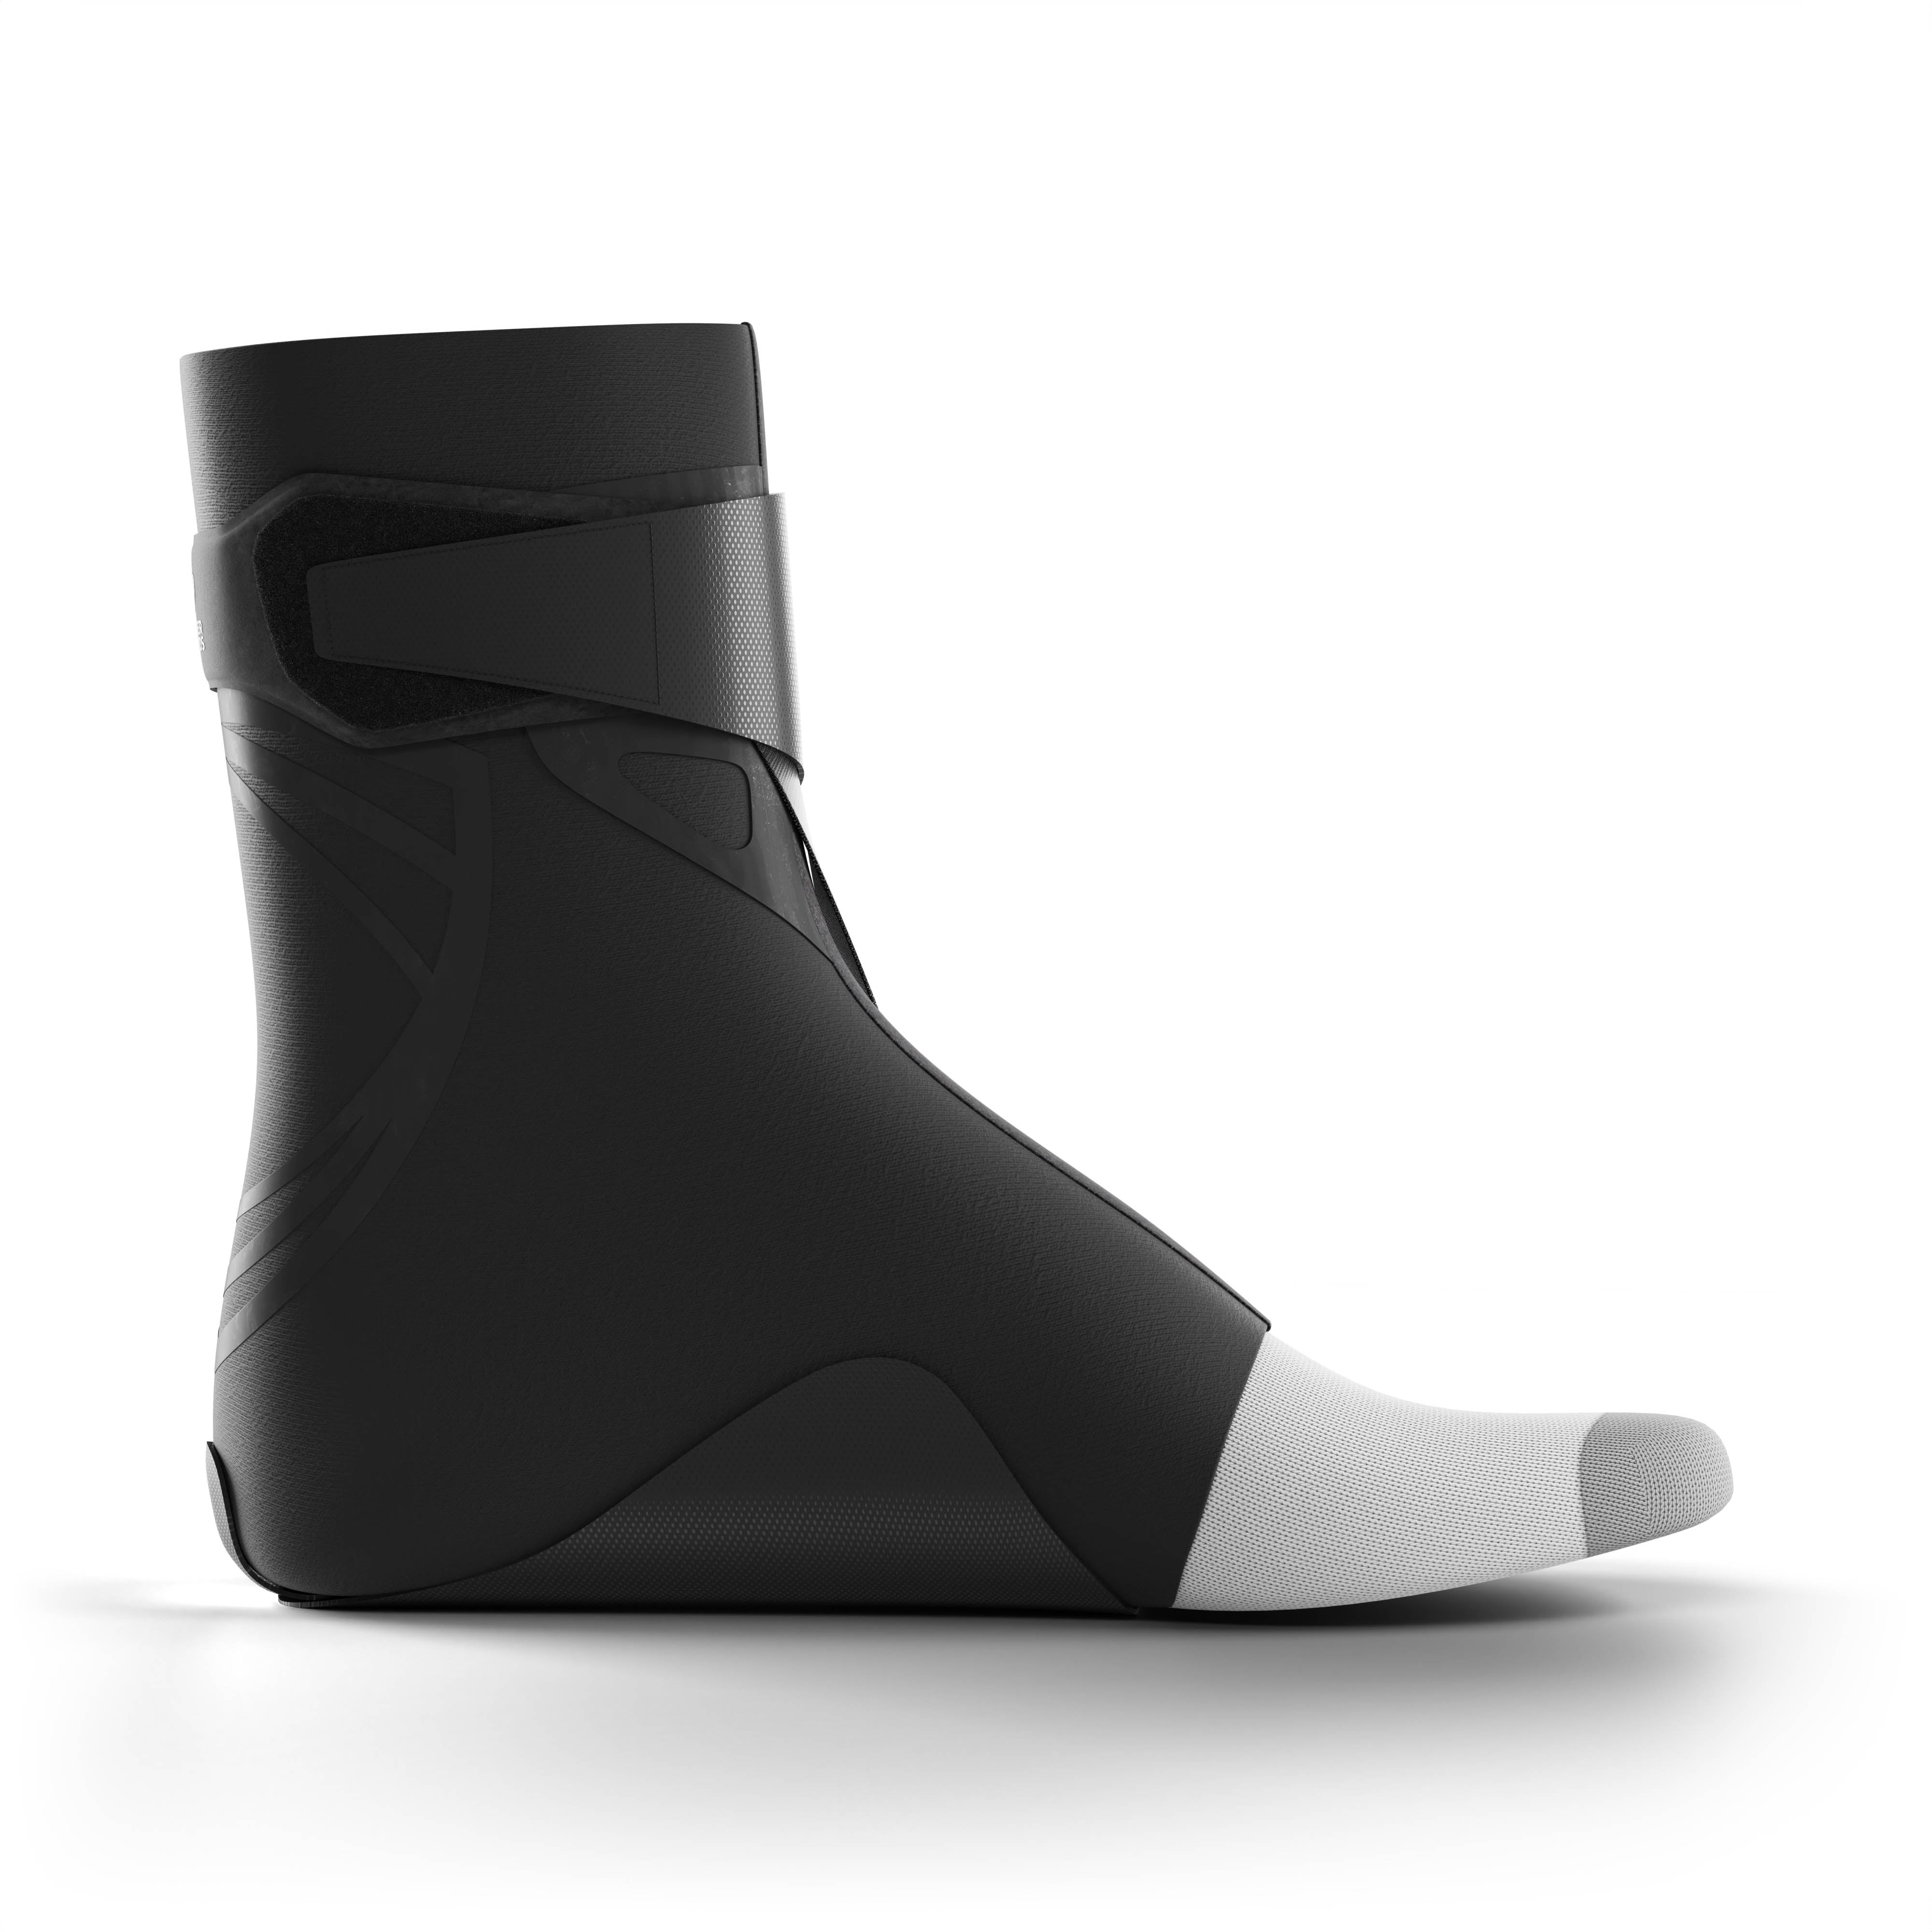 The best ankle brace for all sports ankle support. Medial side view. #color_black